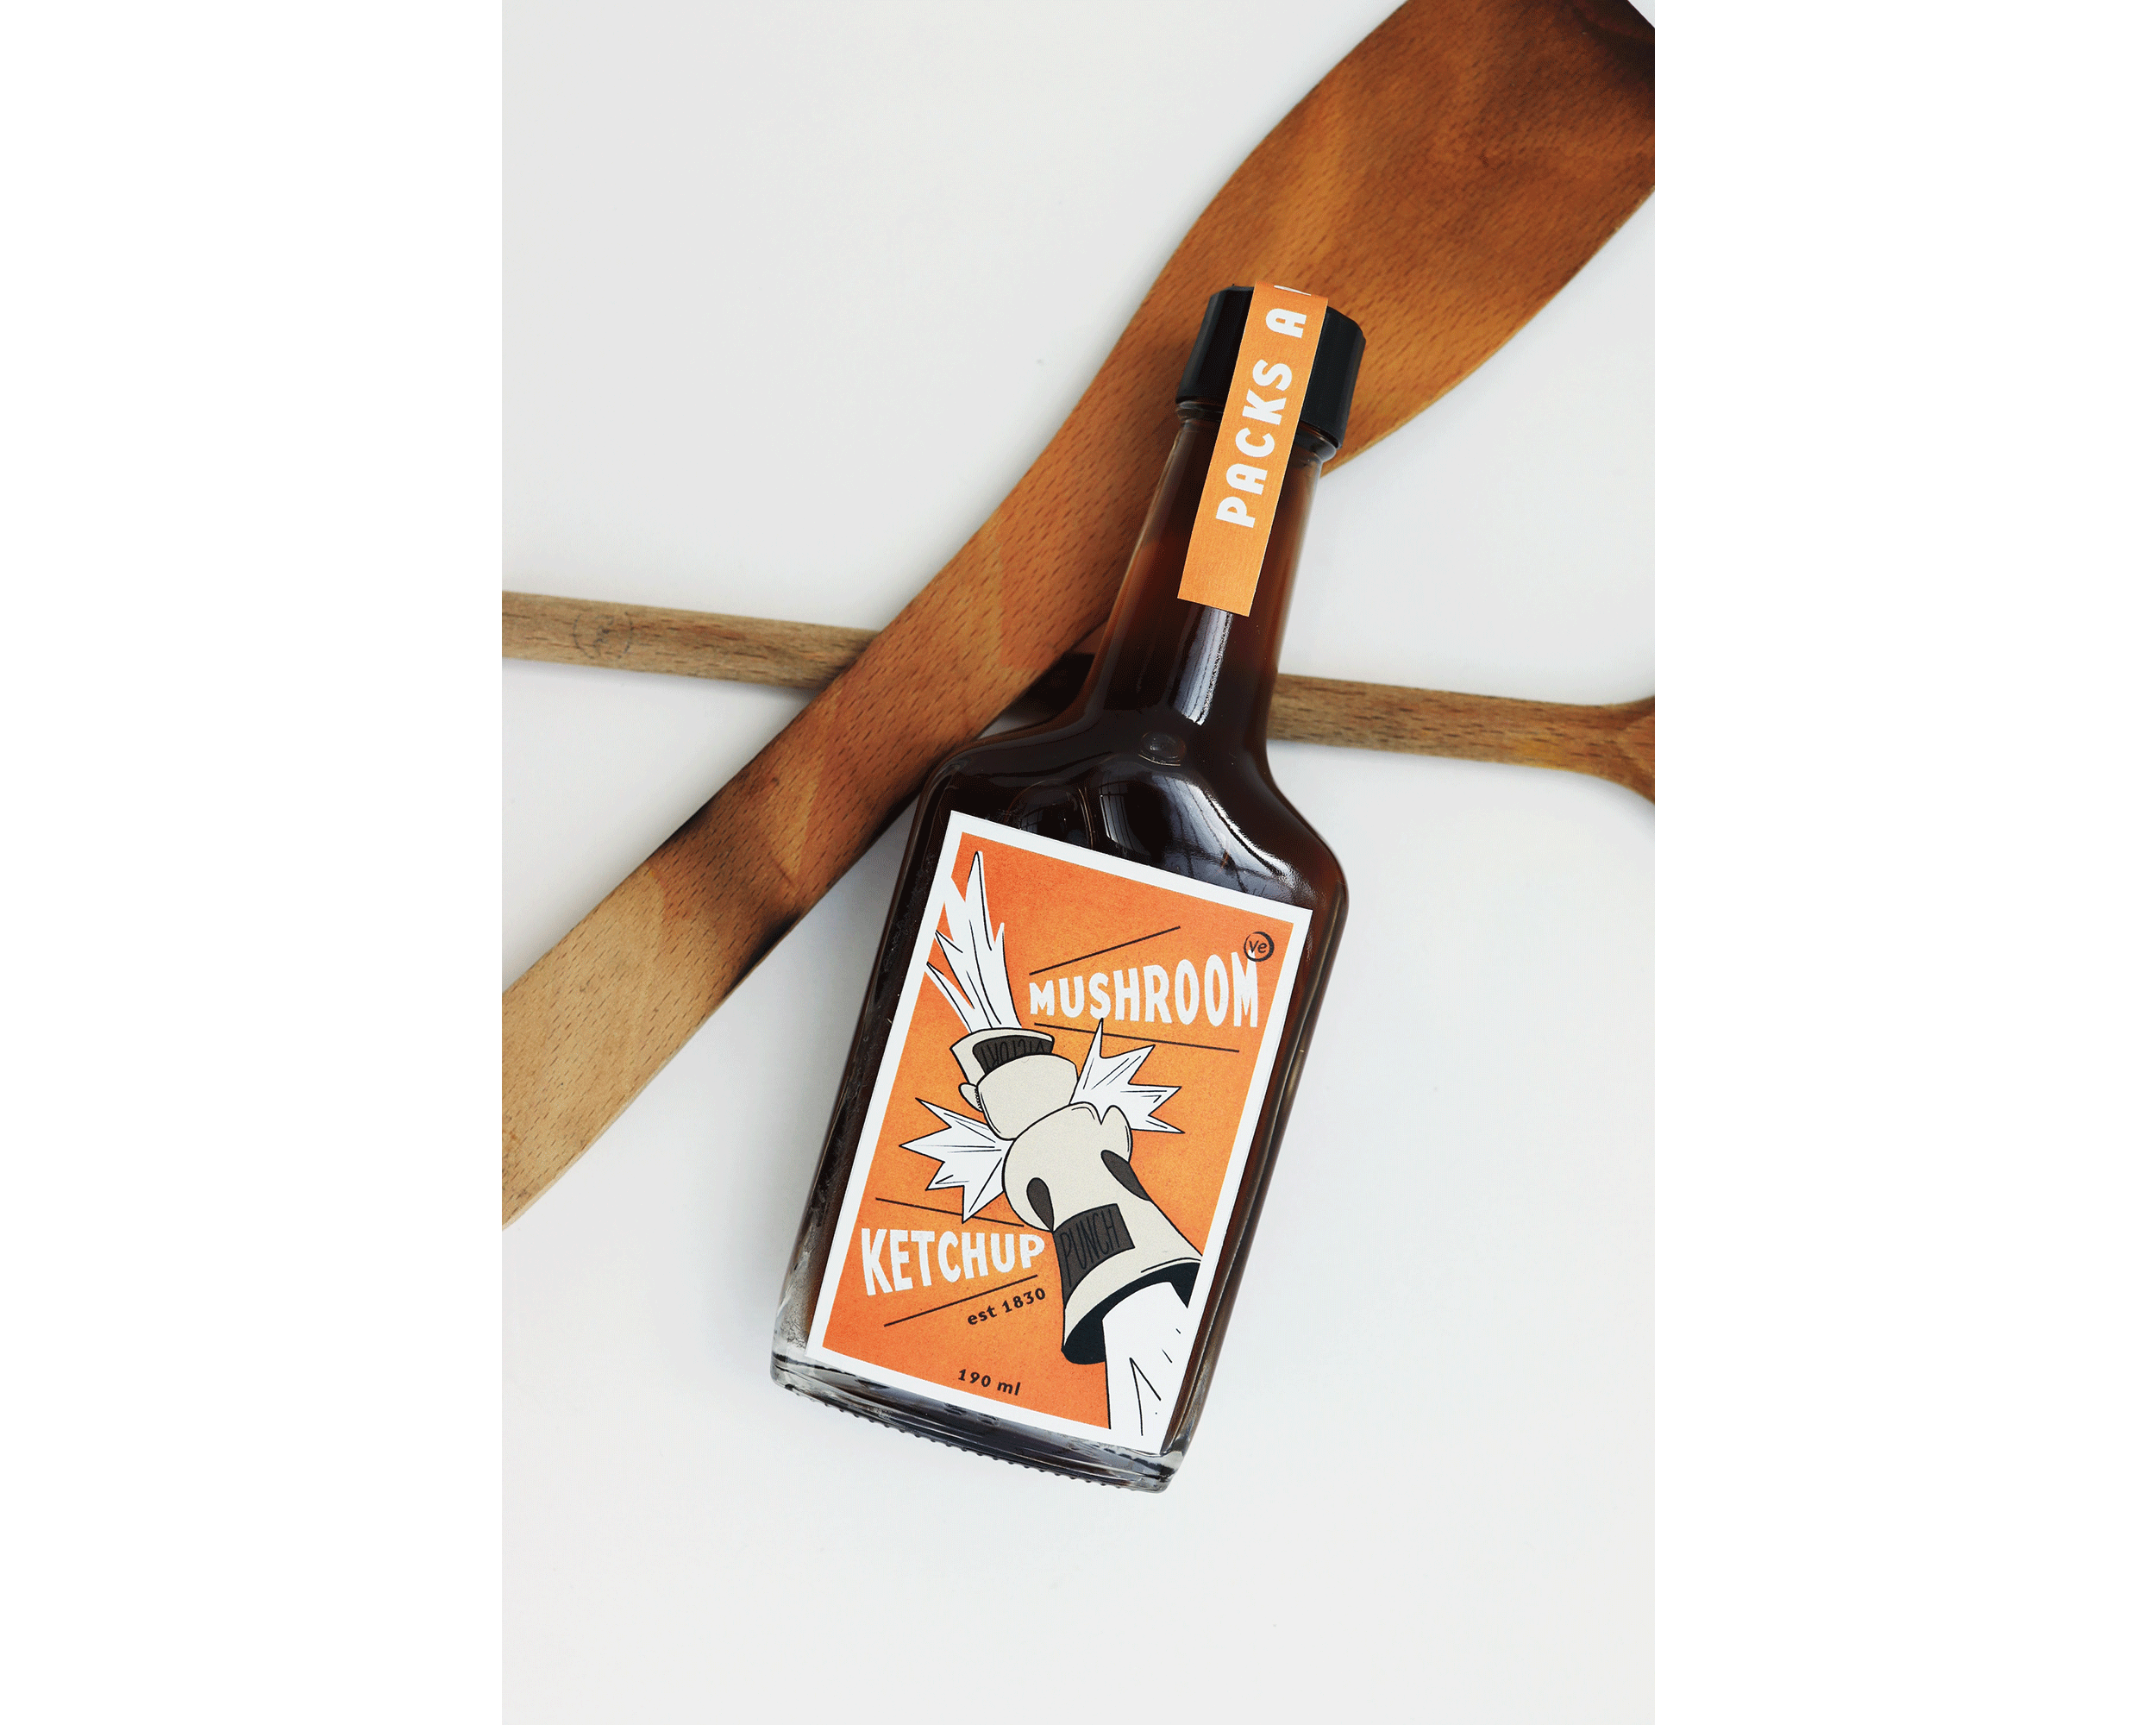 Graphic Design Packaging by Maika Elsley Medina showing a bottle laying on kitchen utensils, with a bright orange label showing a mushroom cross boxing glove punching into the design.